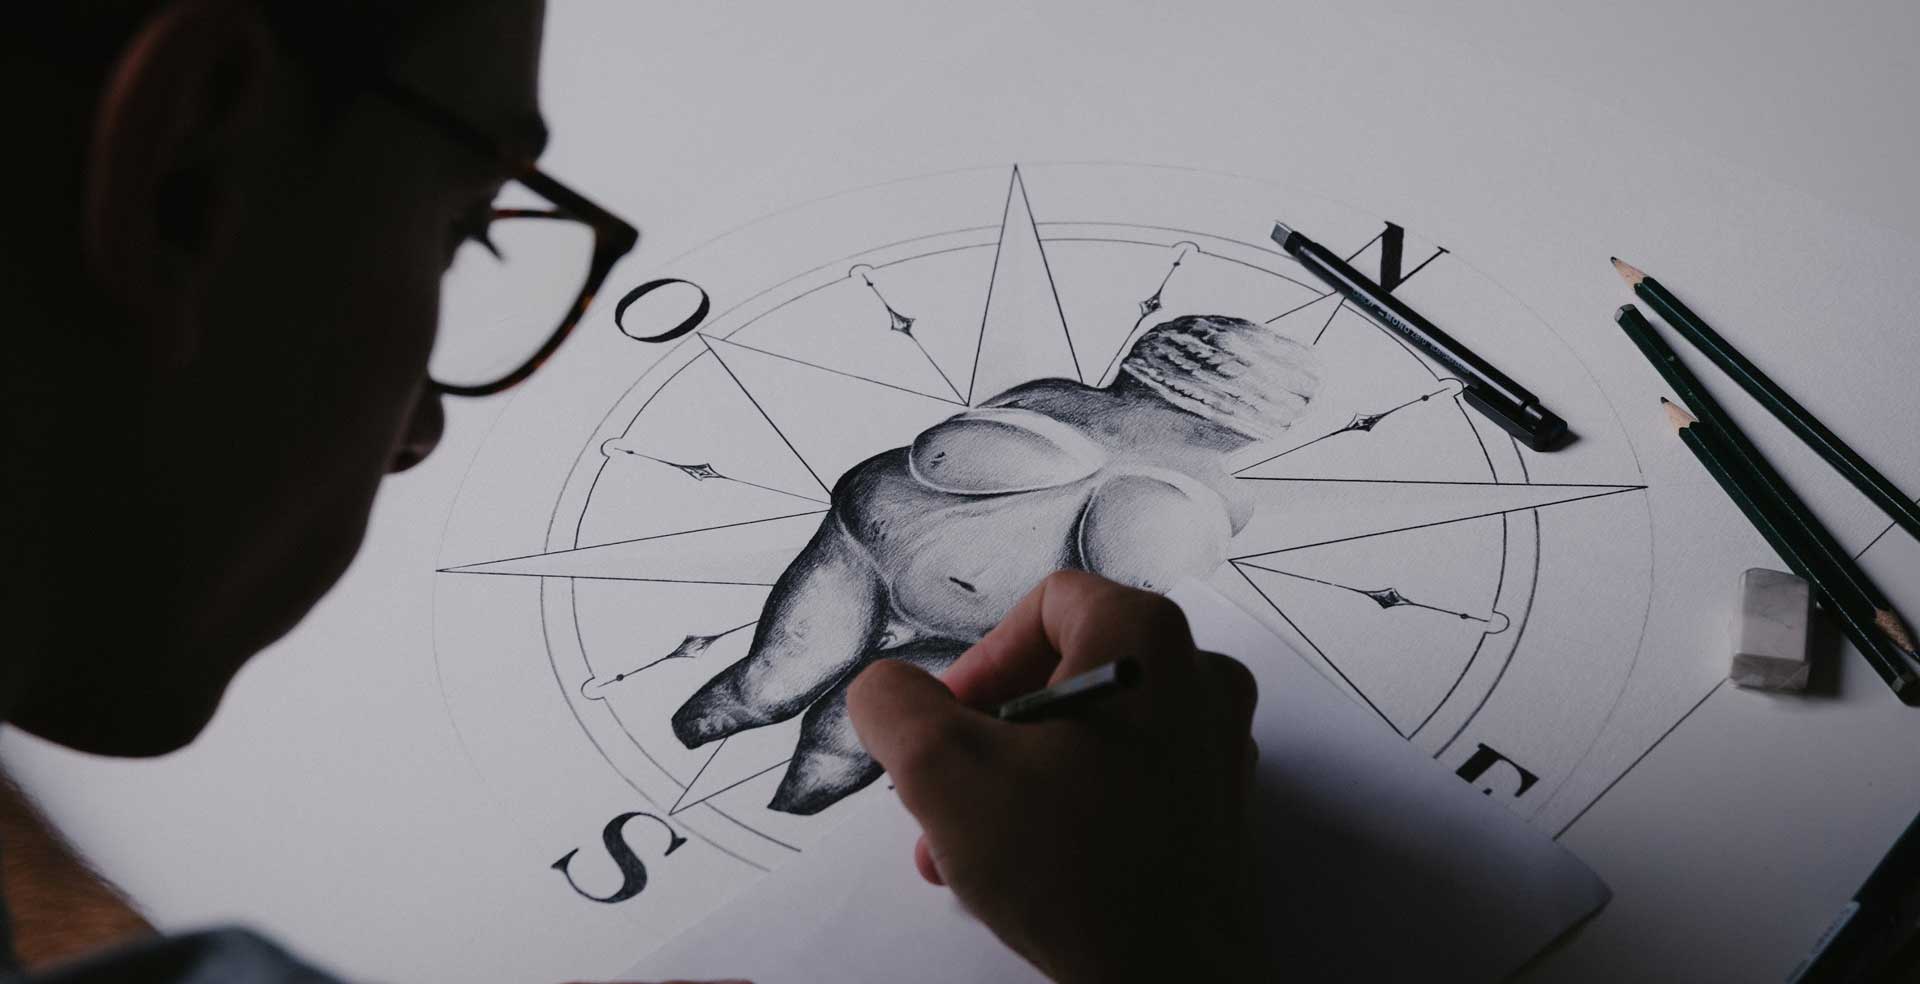 Gonçalo Drawing a dipping compass illustration with Venus of Willendorf